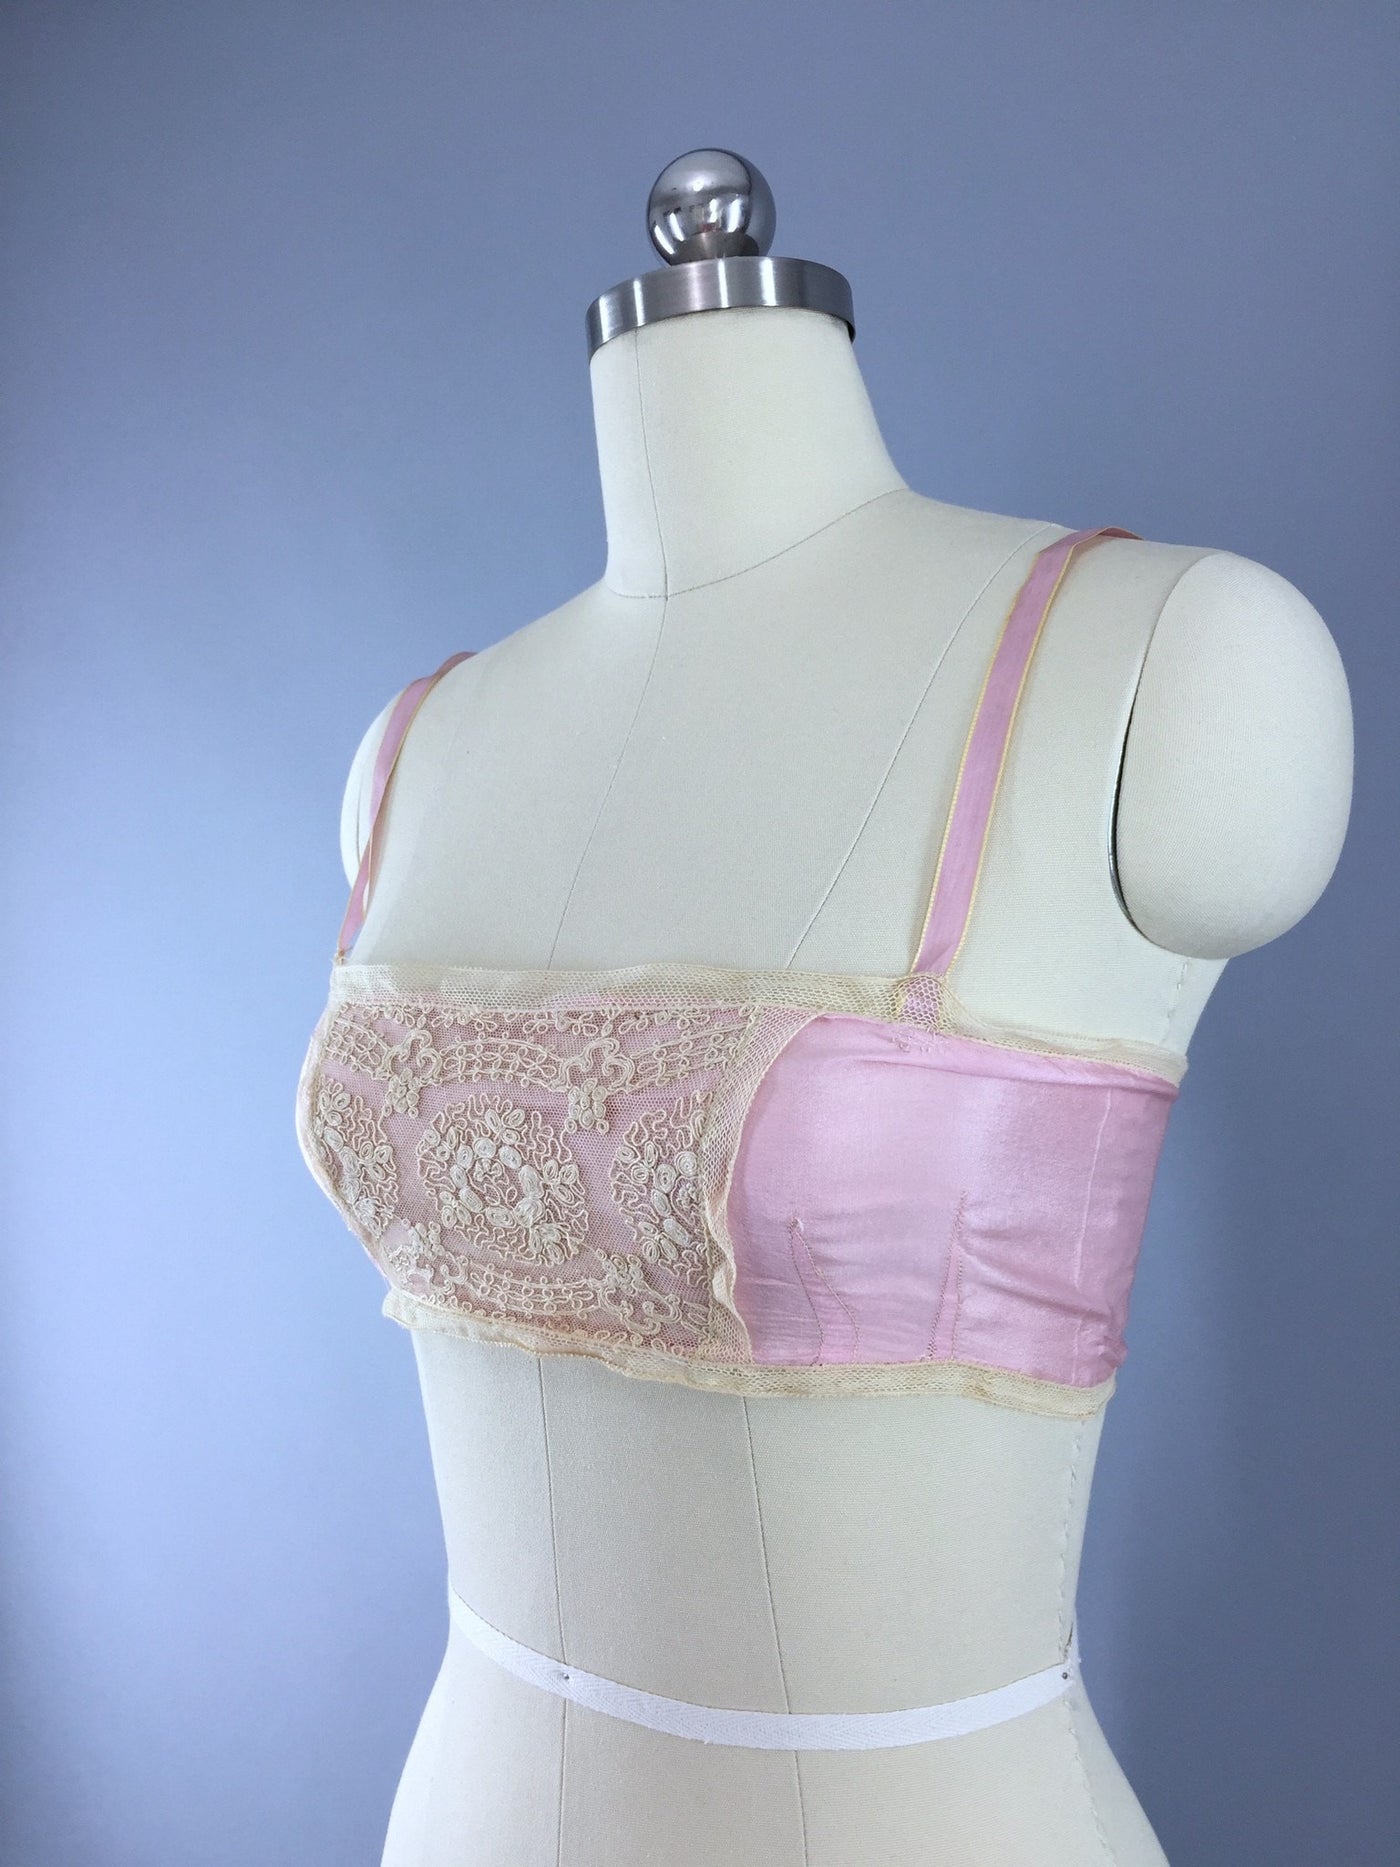 Vintage 1920s Pink Silk and Lace Bra by Nanette Undies - ThisBlueBird